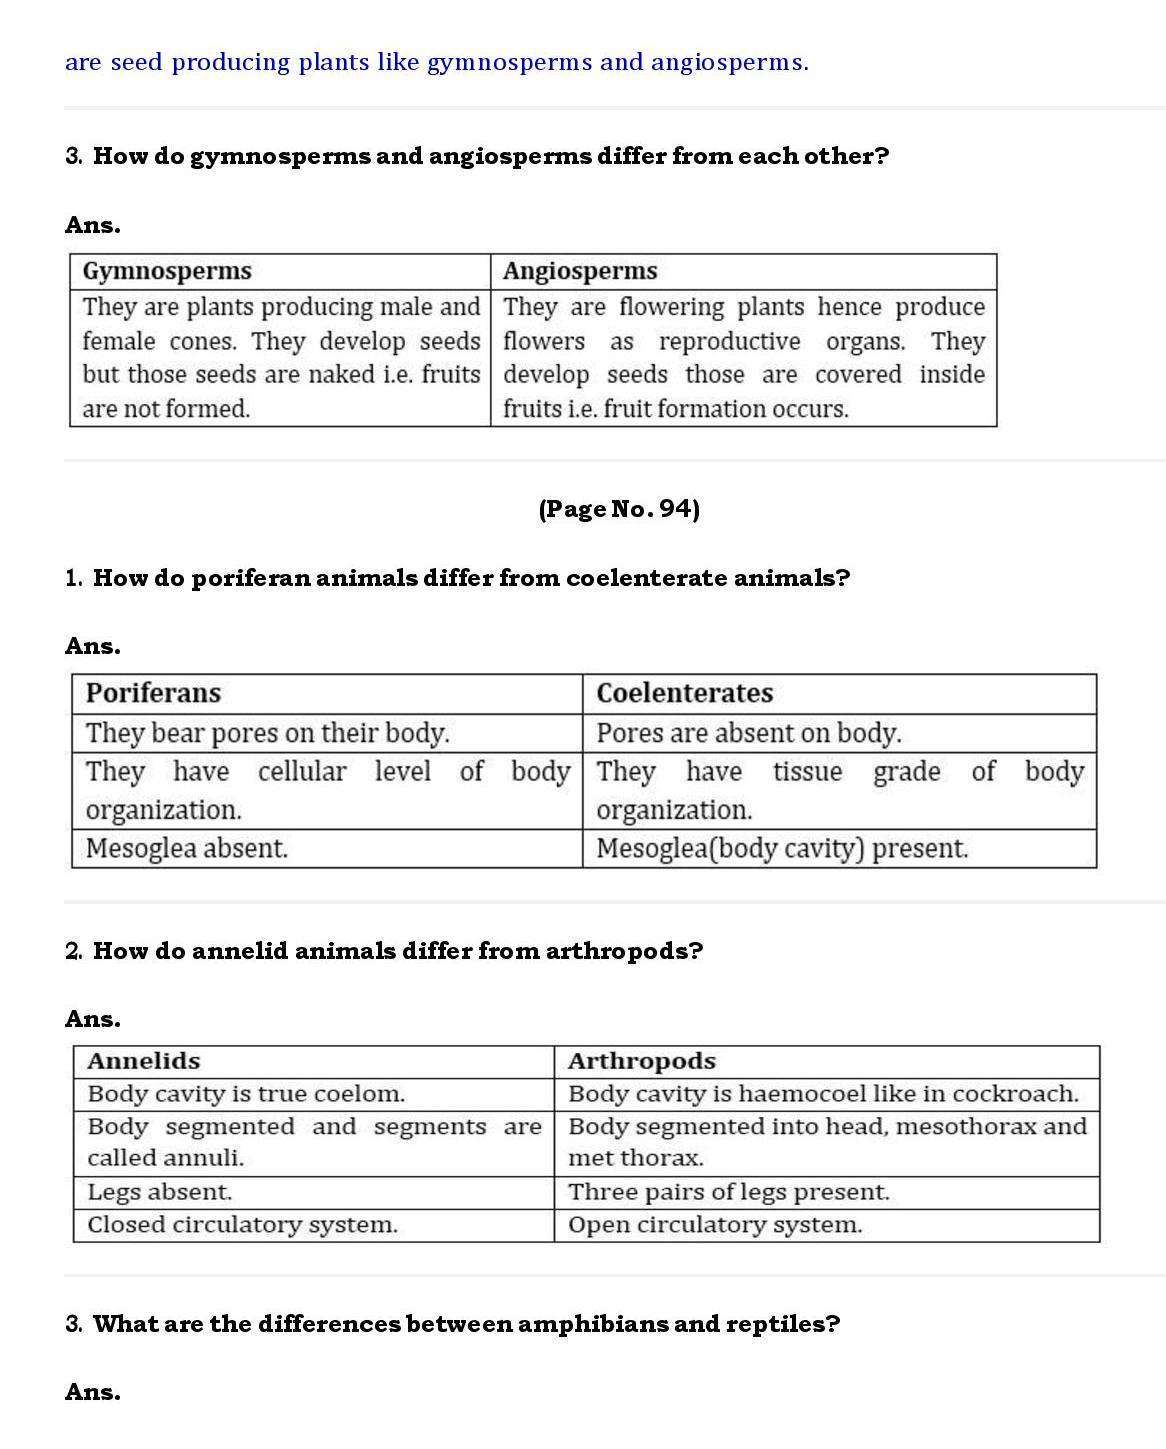 Ch-7 - Diversity in Living Organisms - Page wise NCERT Solution